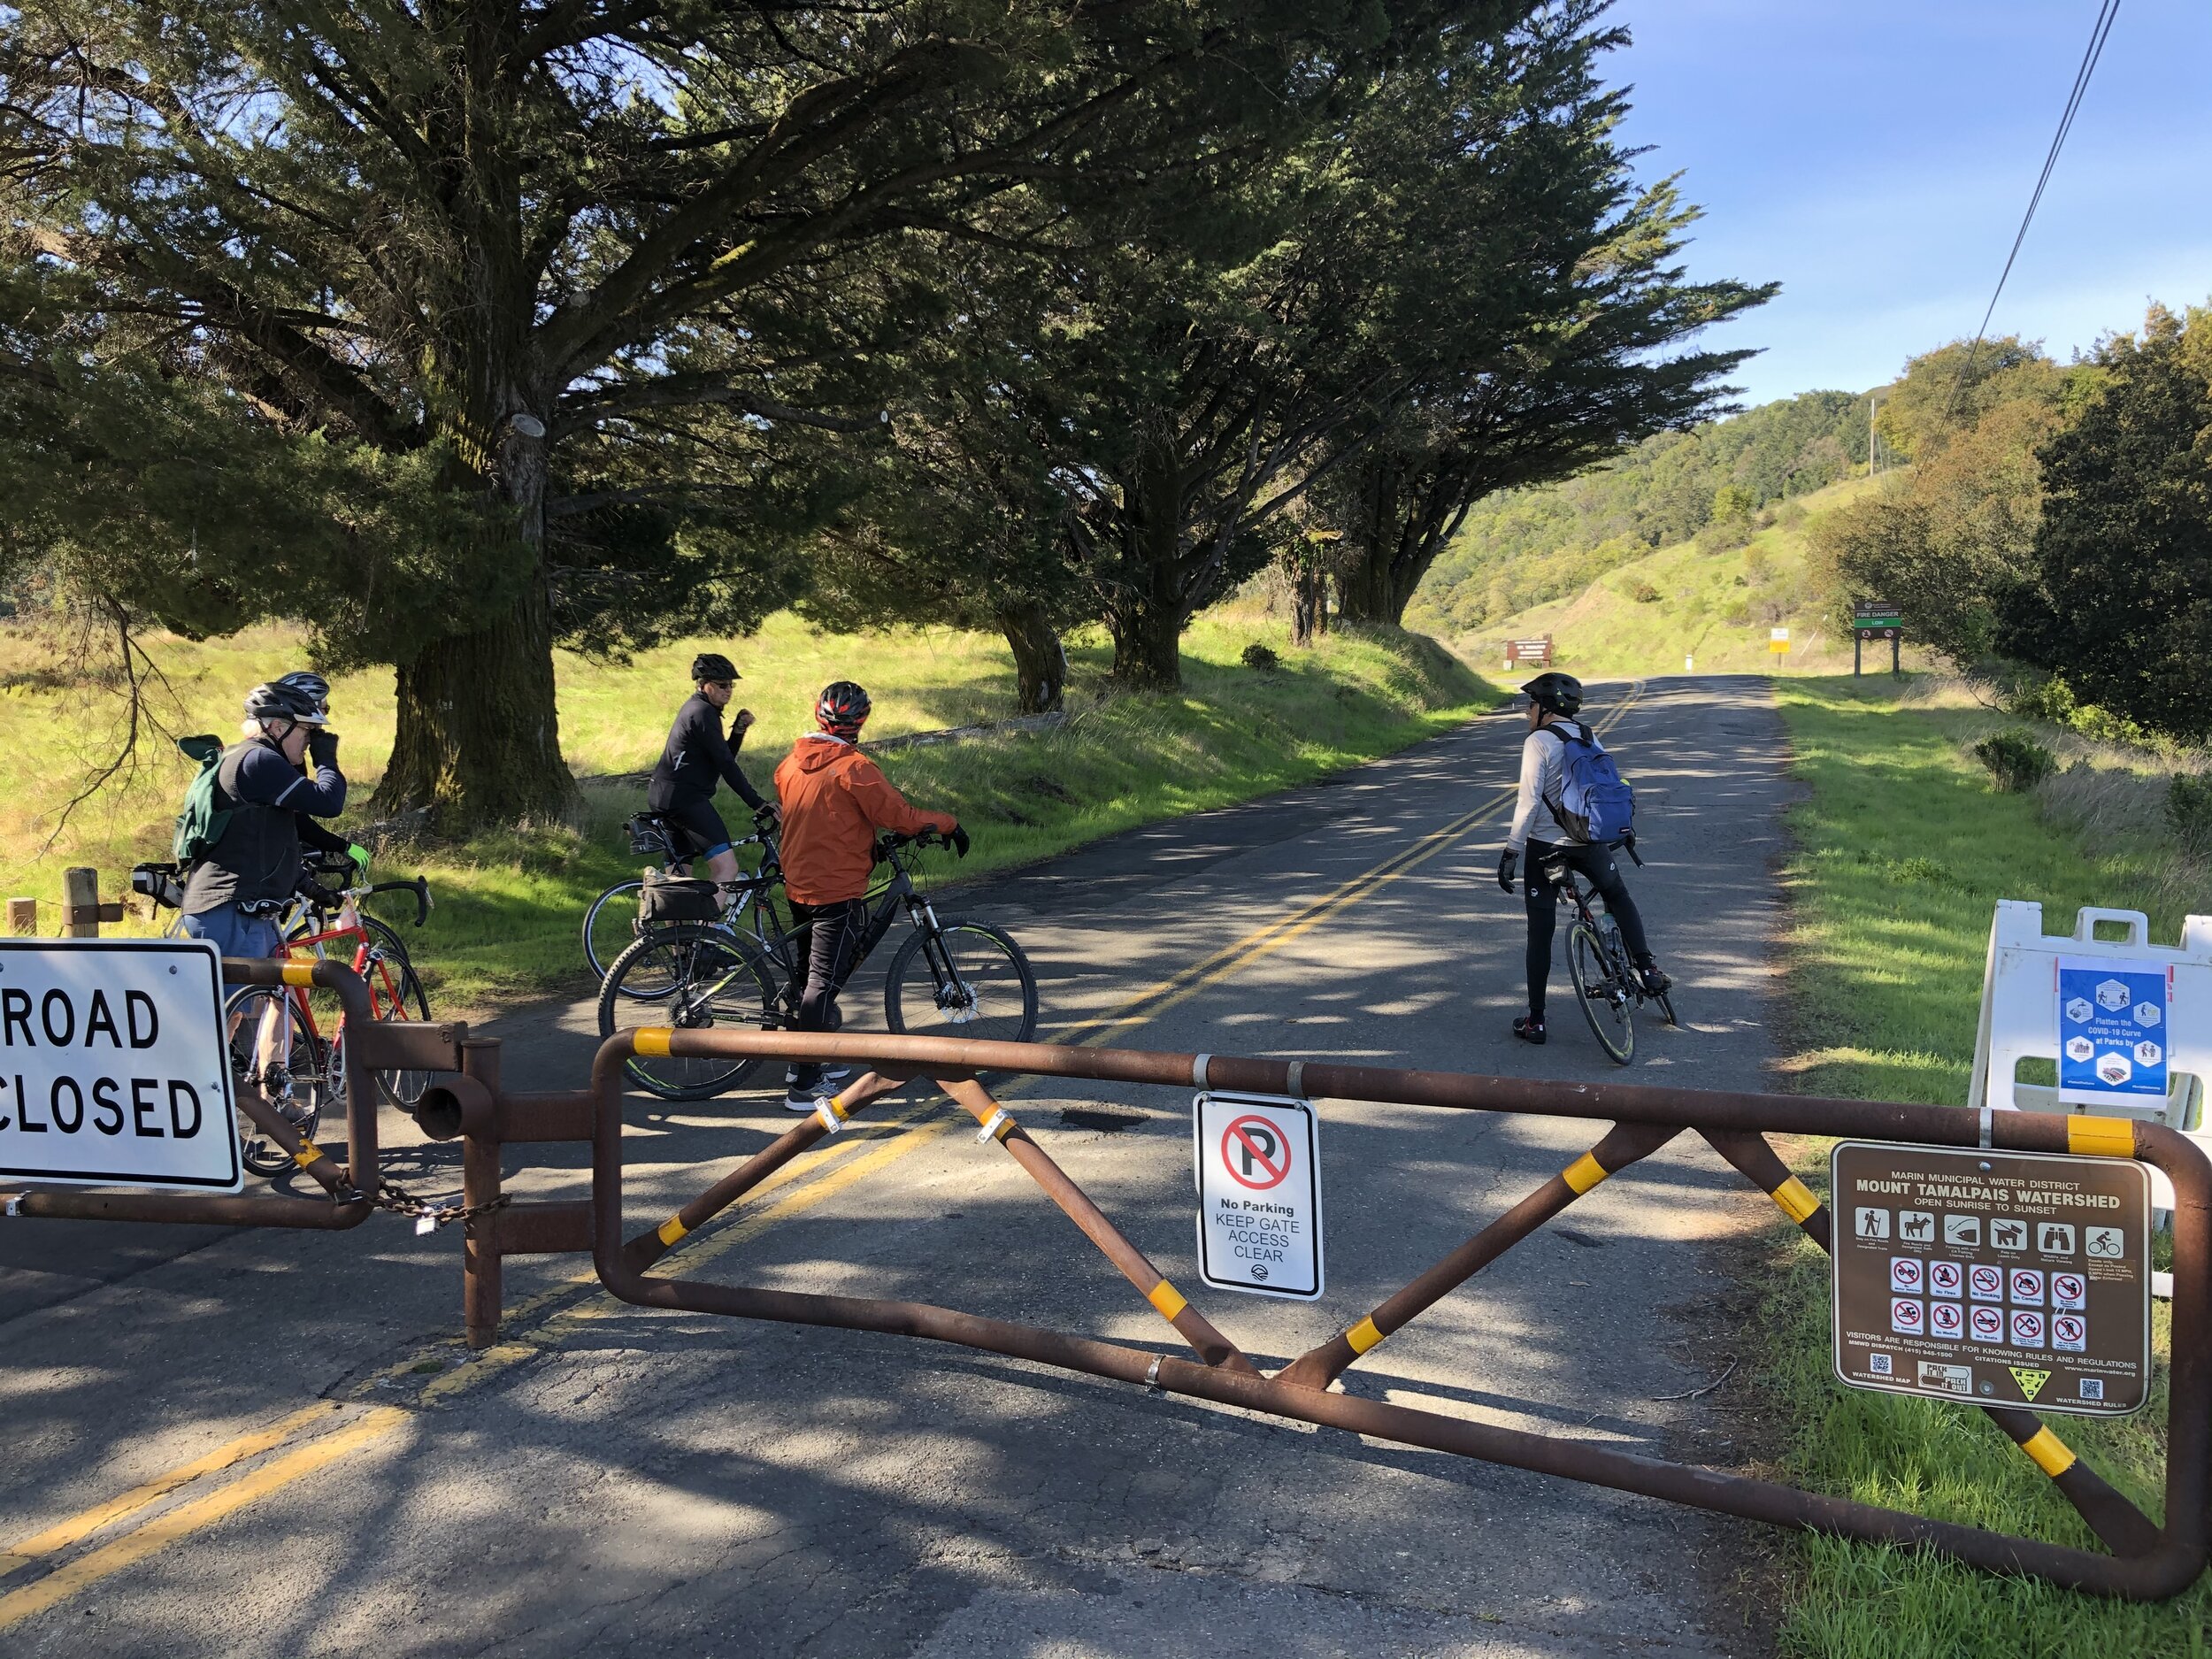 Fairfax Bolinas Road at the Meadow Club. Thankfully bicycles are okay.